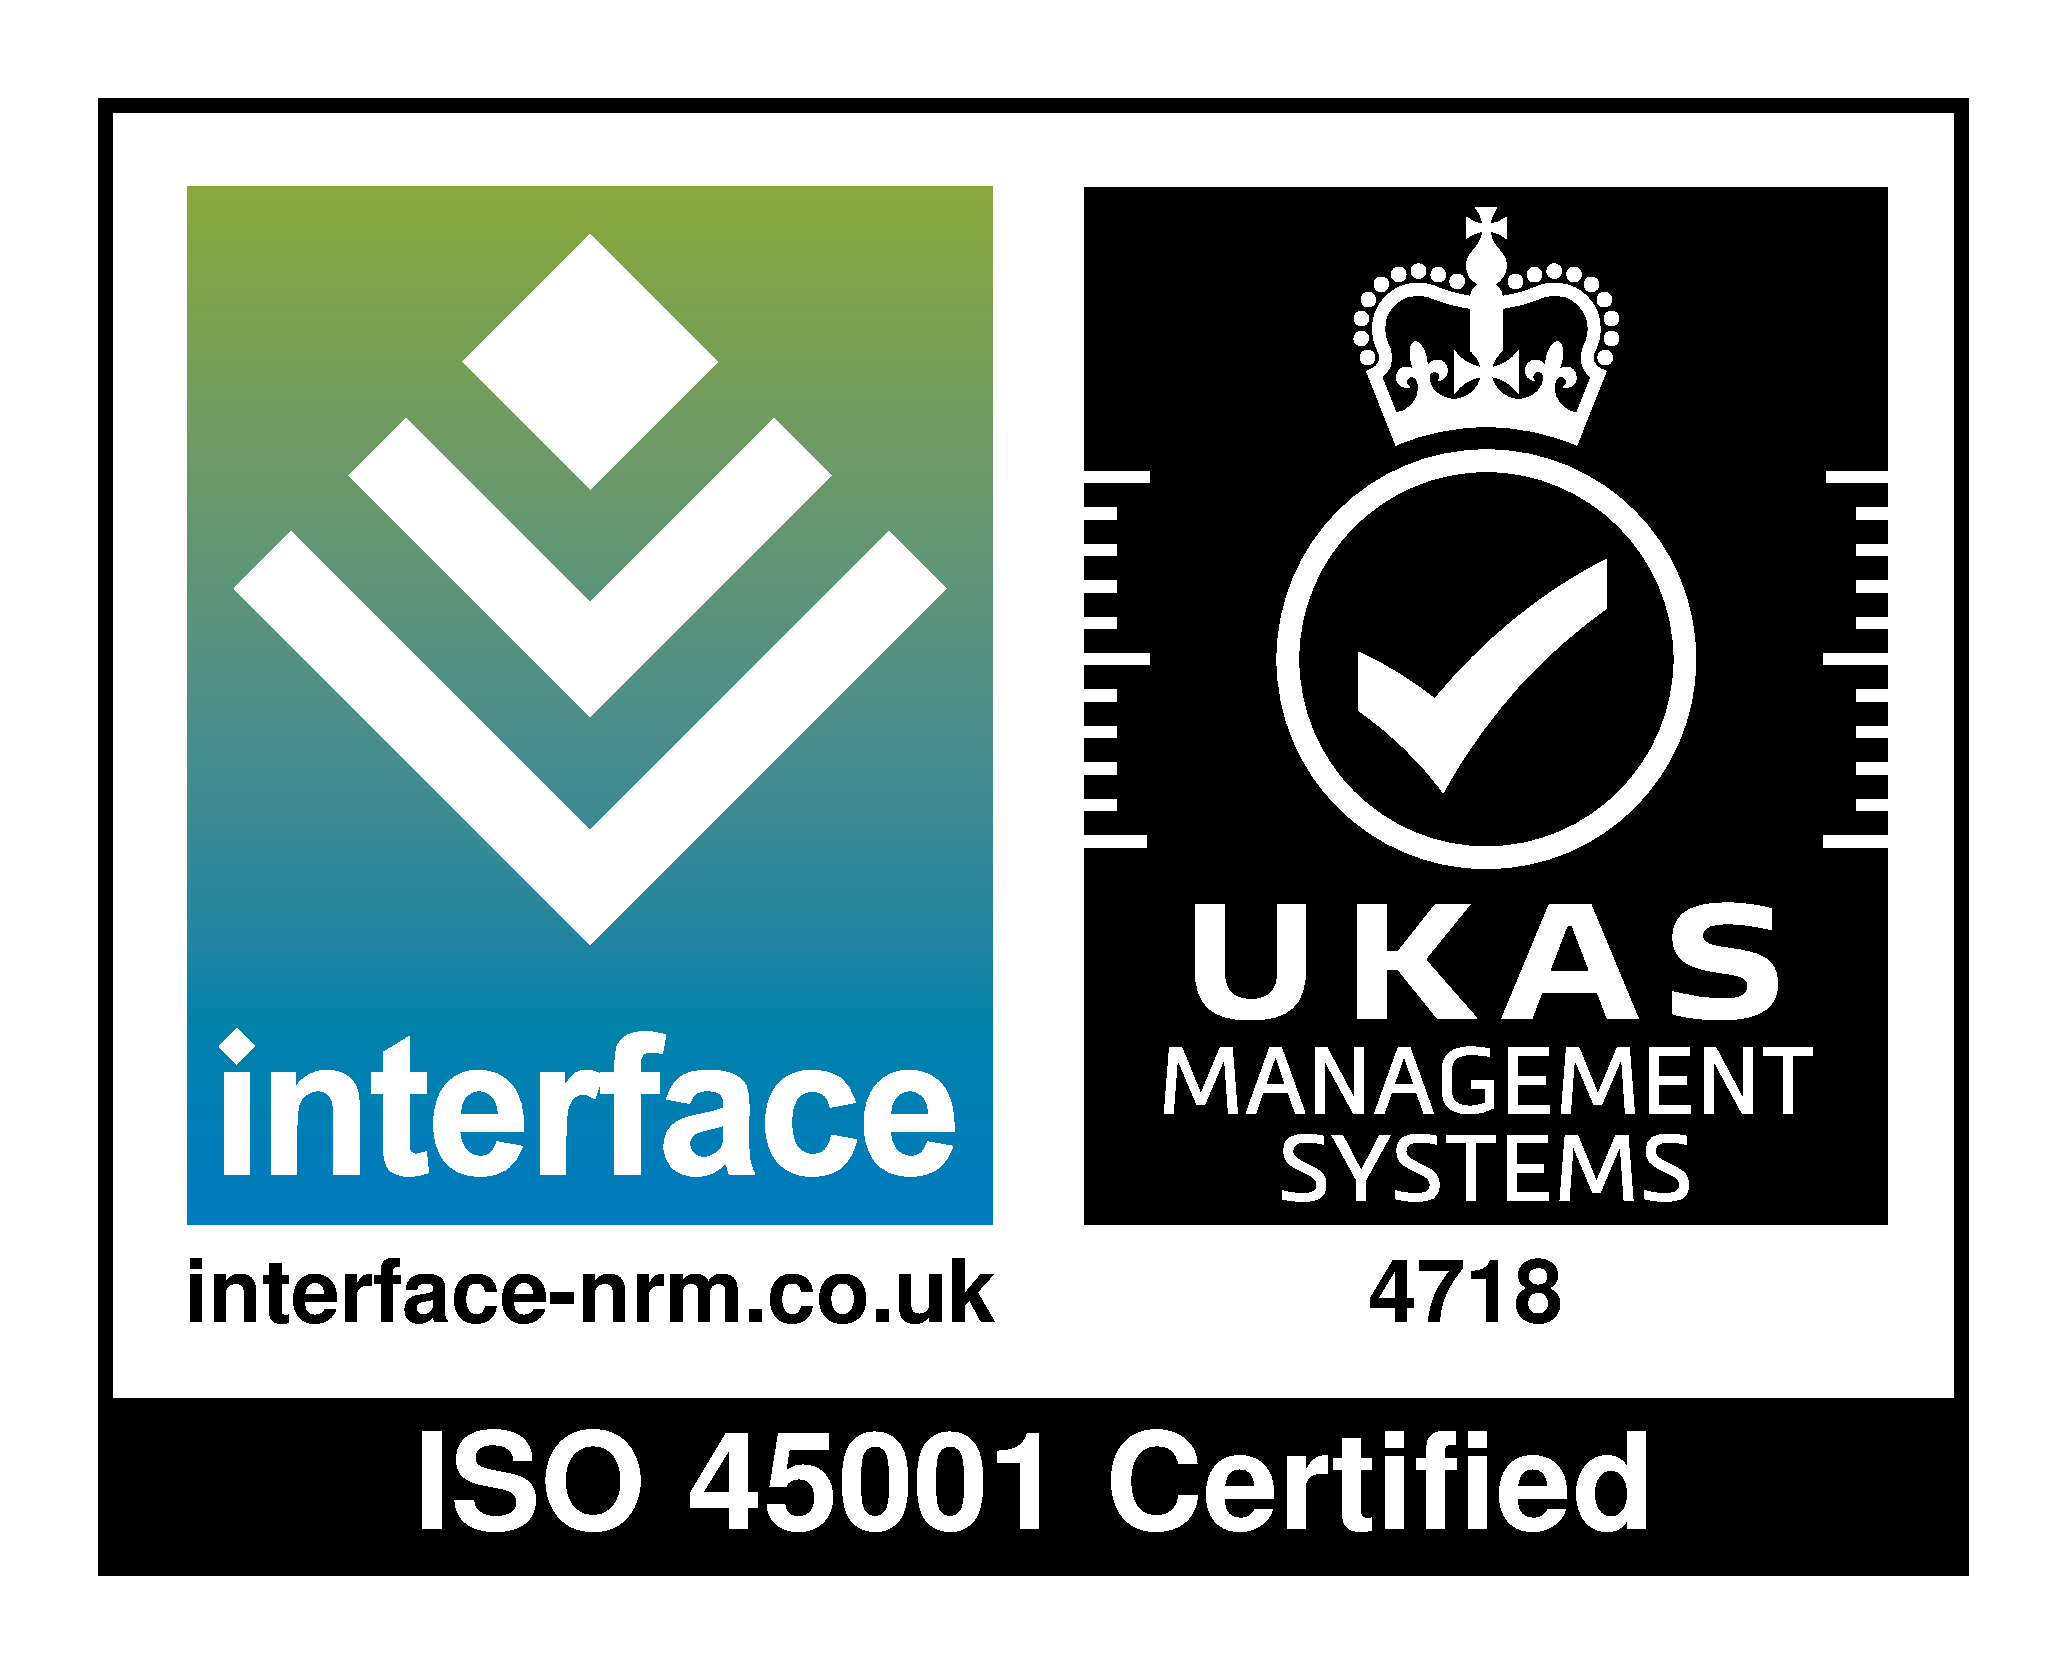 Therser UK awarded ISO 45001 Certification